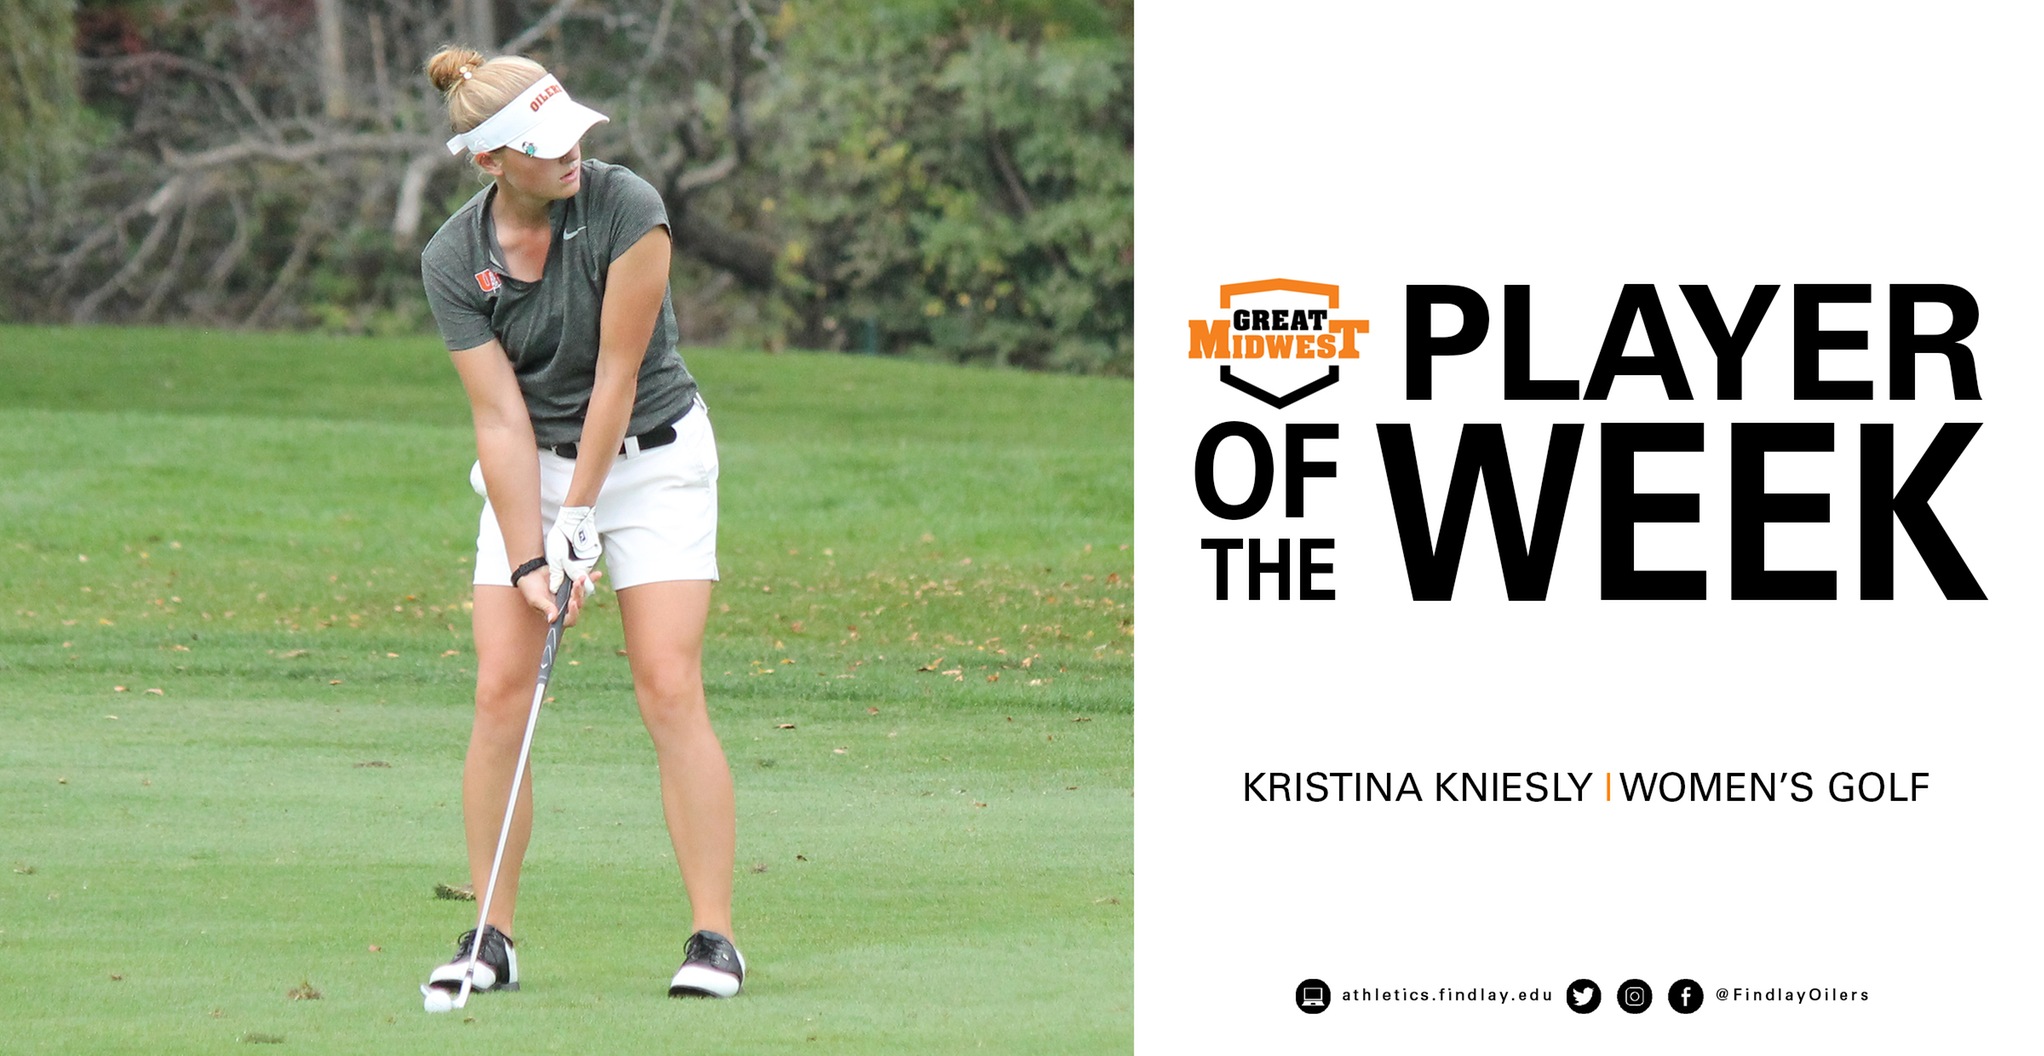 Kniesly Wins Player of the Week Award